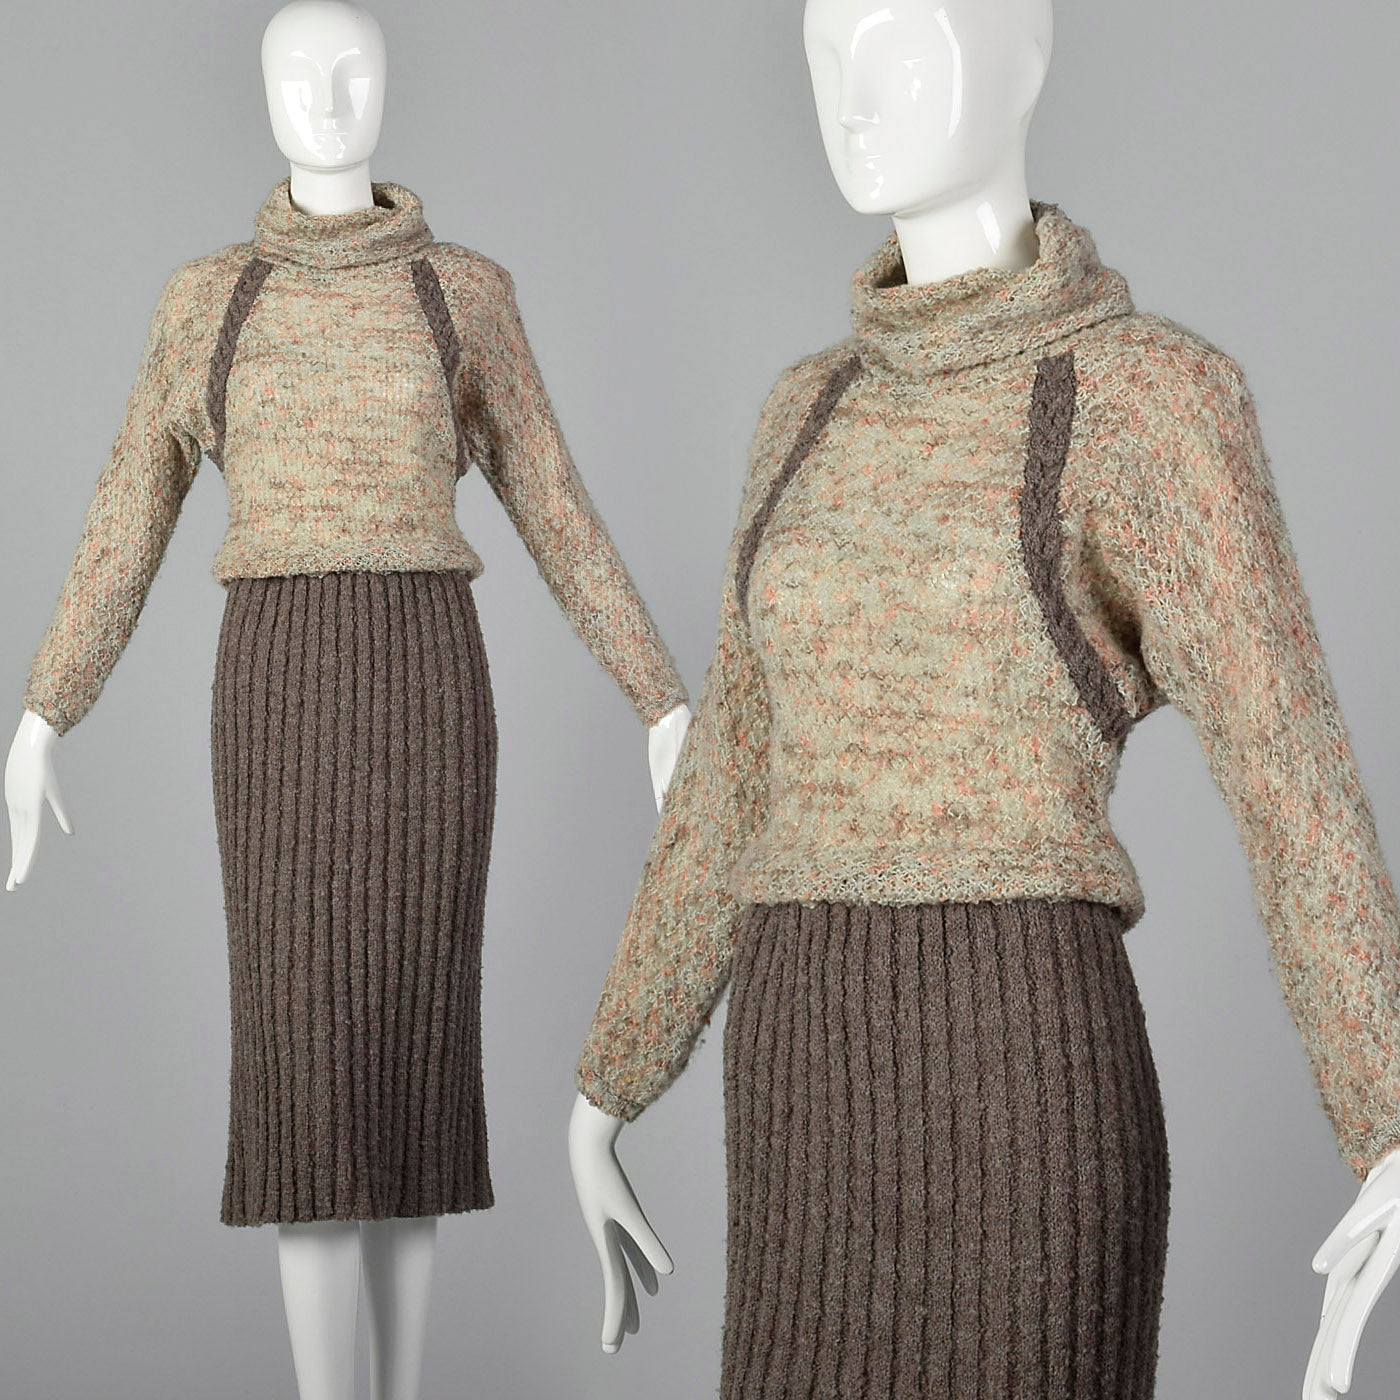 1970s Knit Dress with Cowl Neck